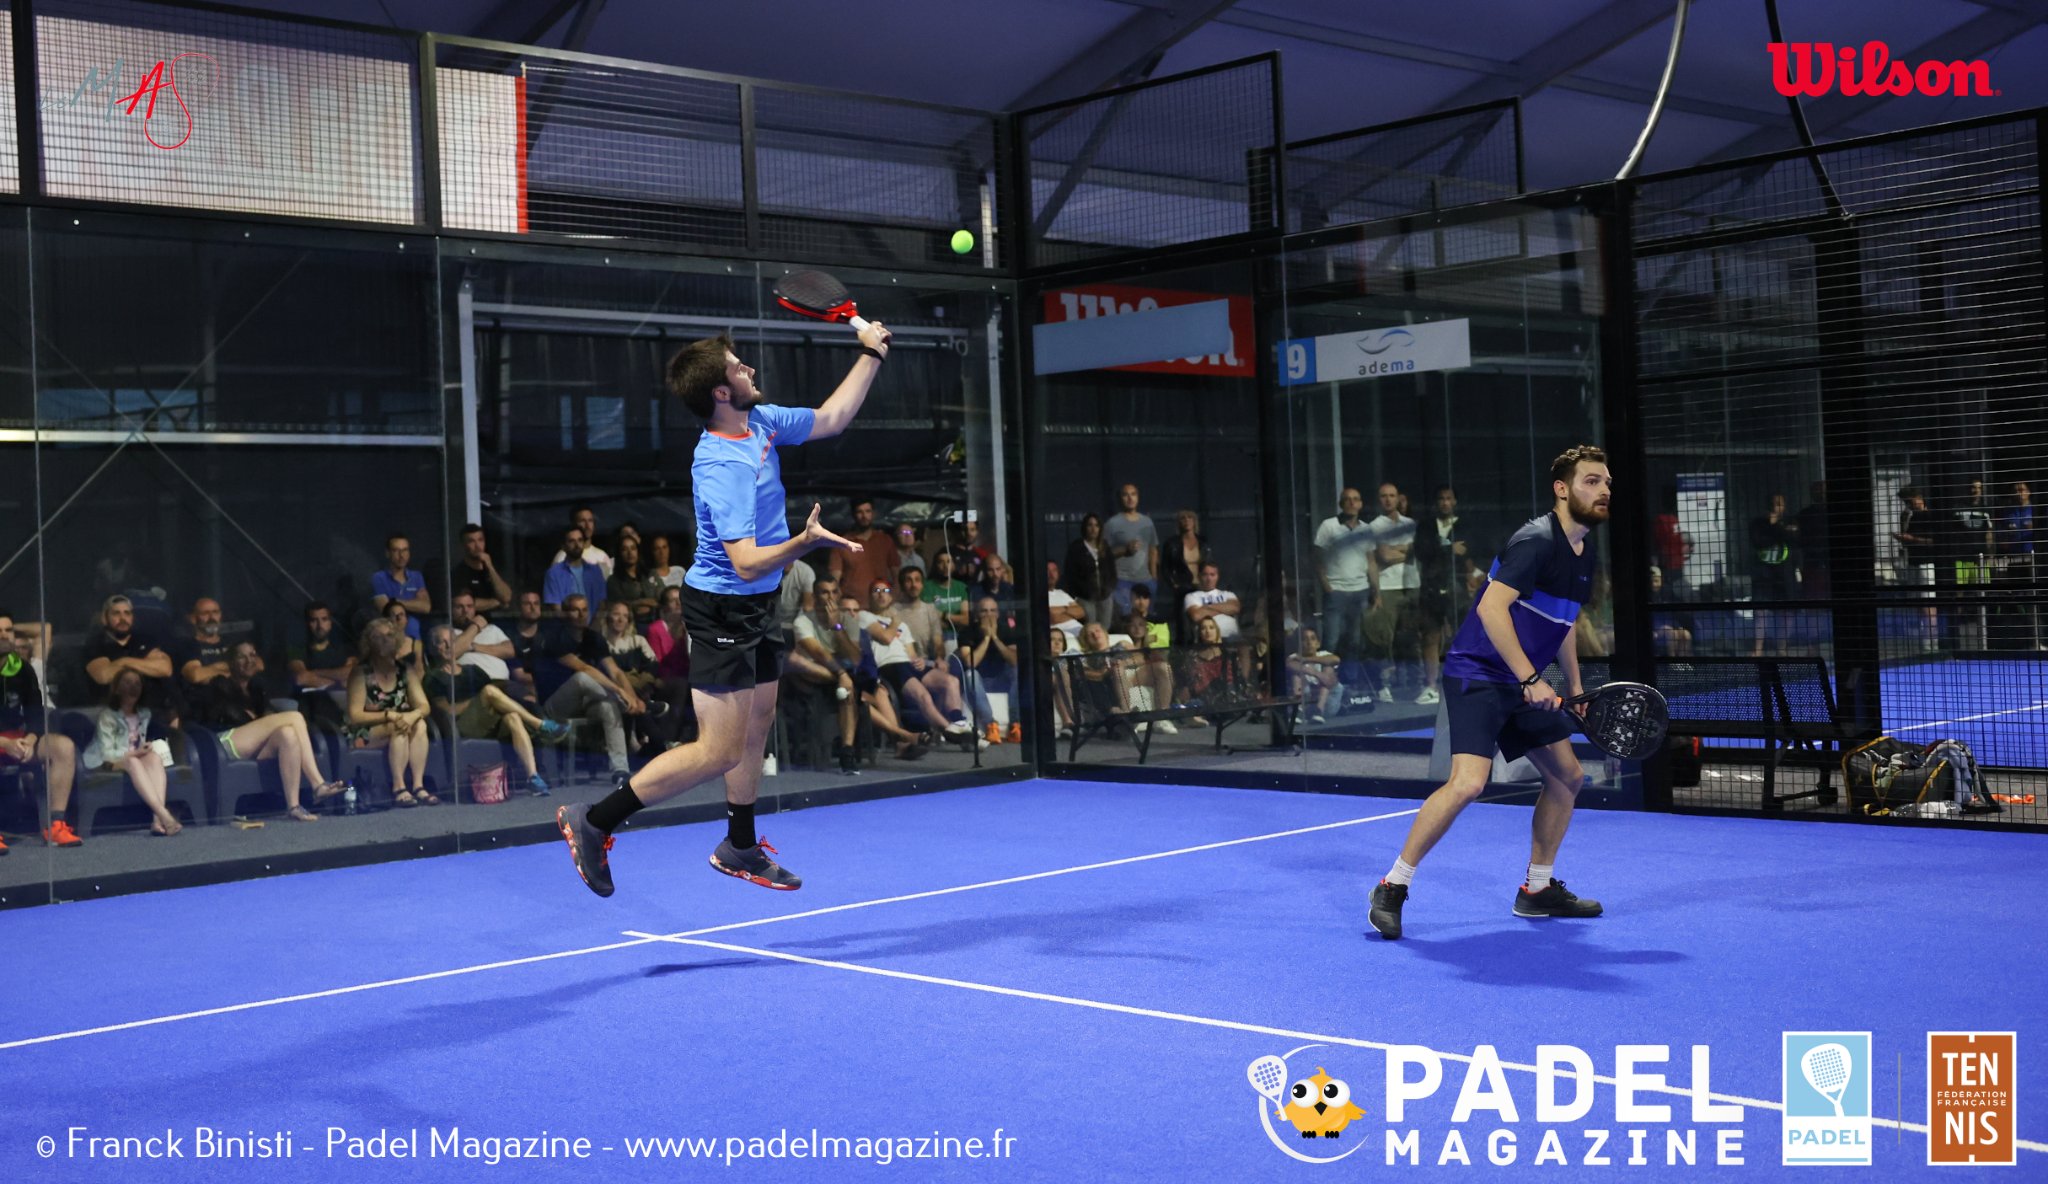 FFT Padel Tour Perpignan: semi-finals that promise to be very open